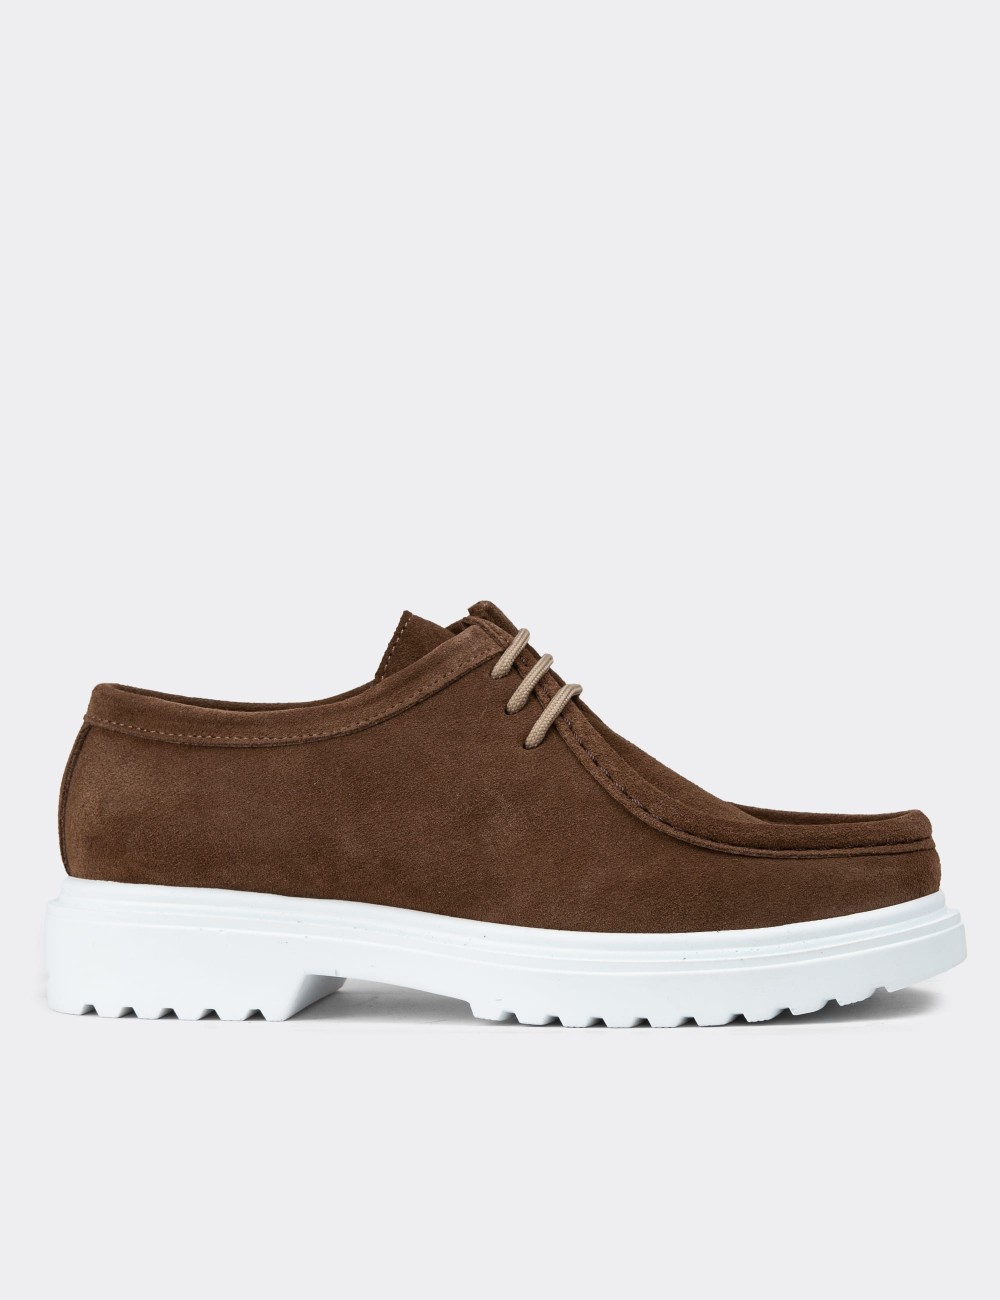 Sandstone Suede Leather Lace-up Shoes - 01935ZVZNC04